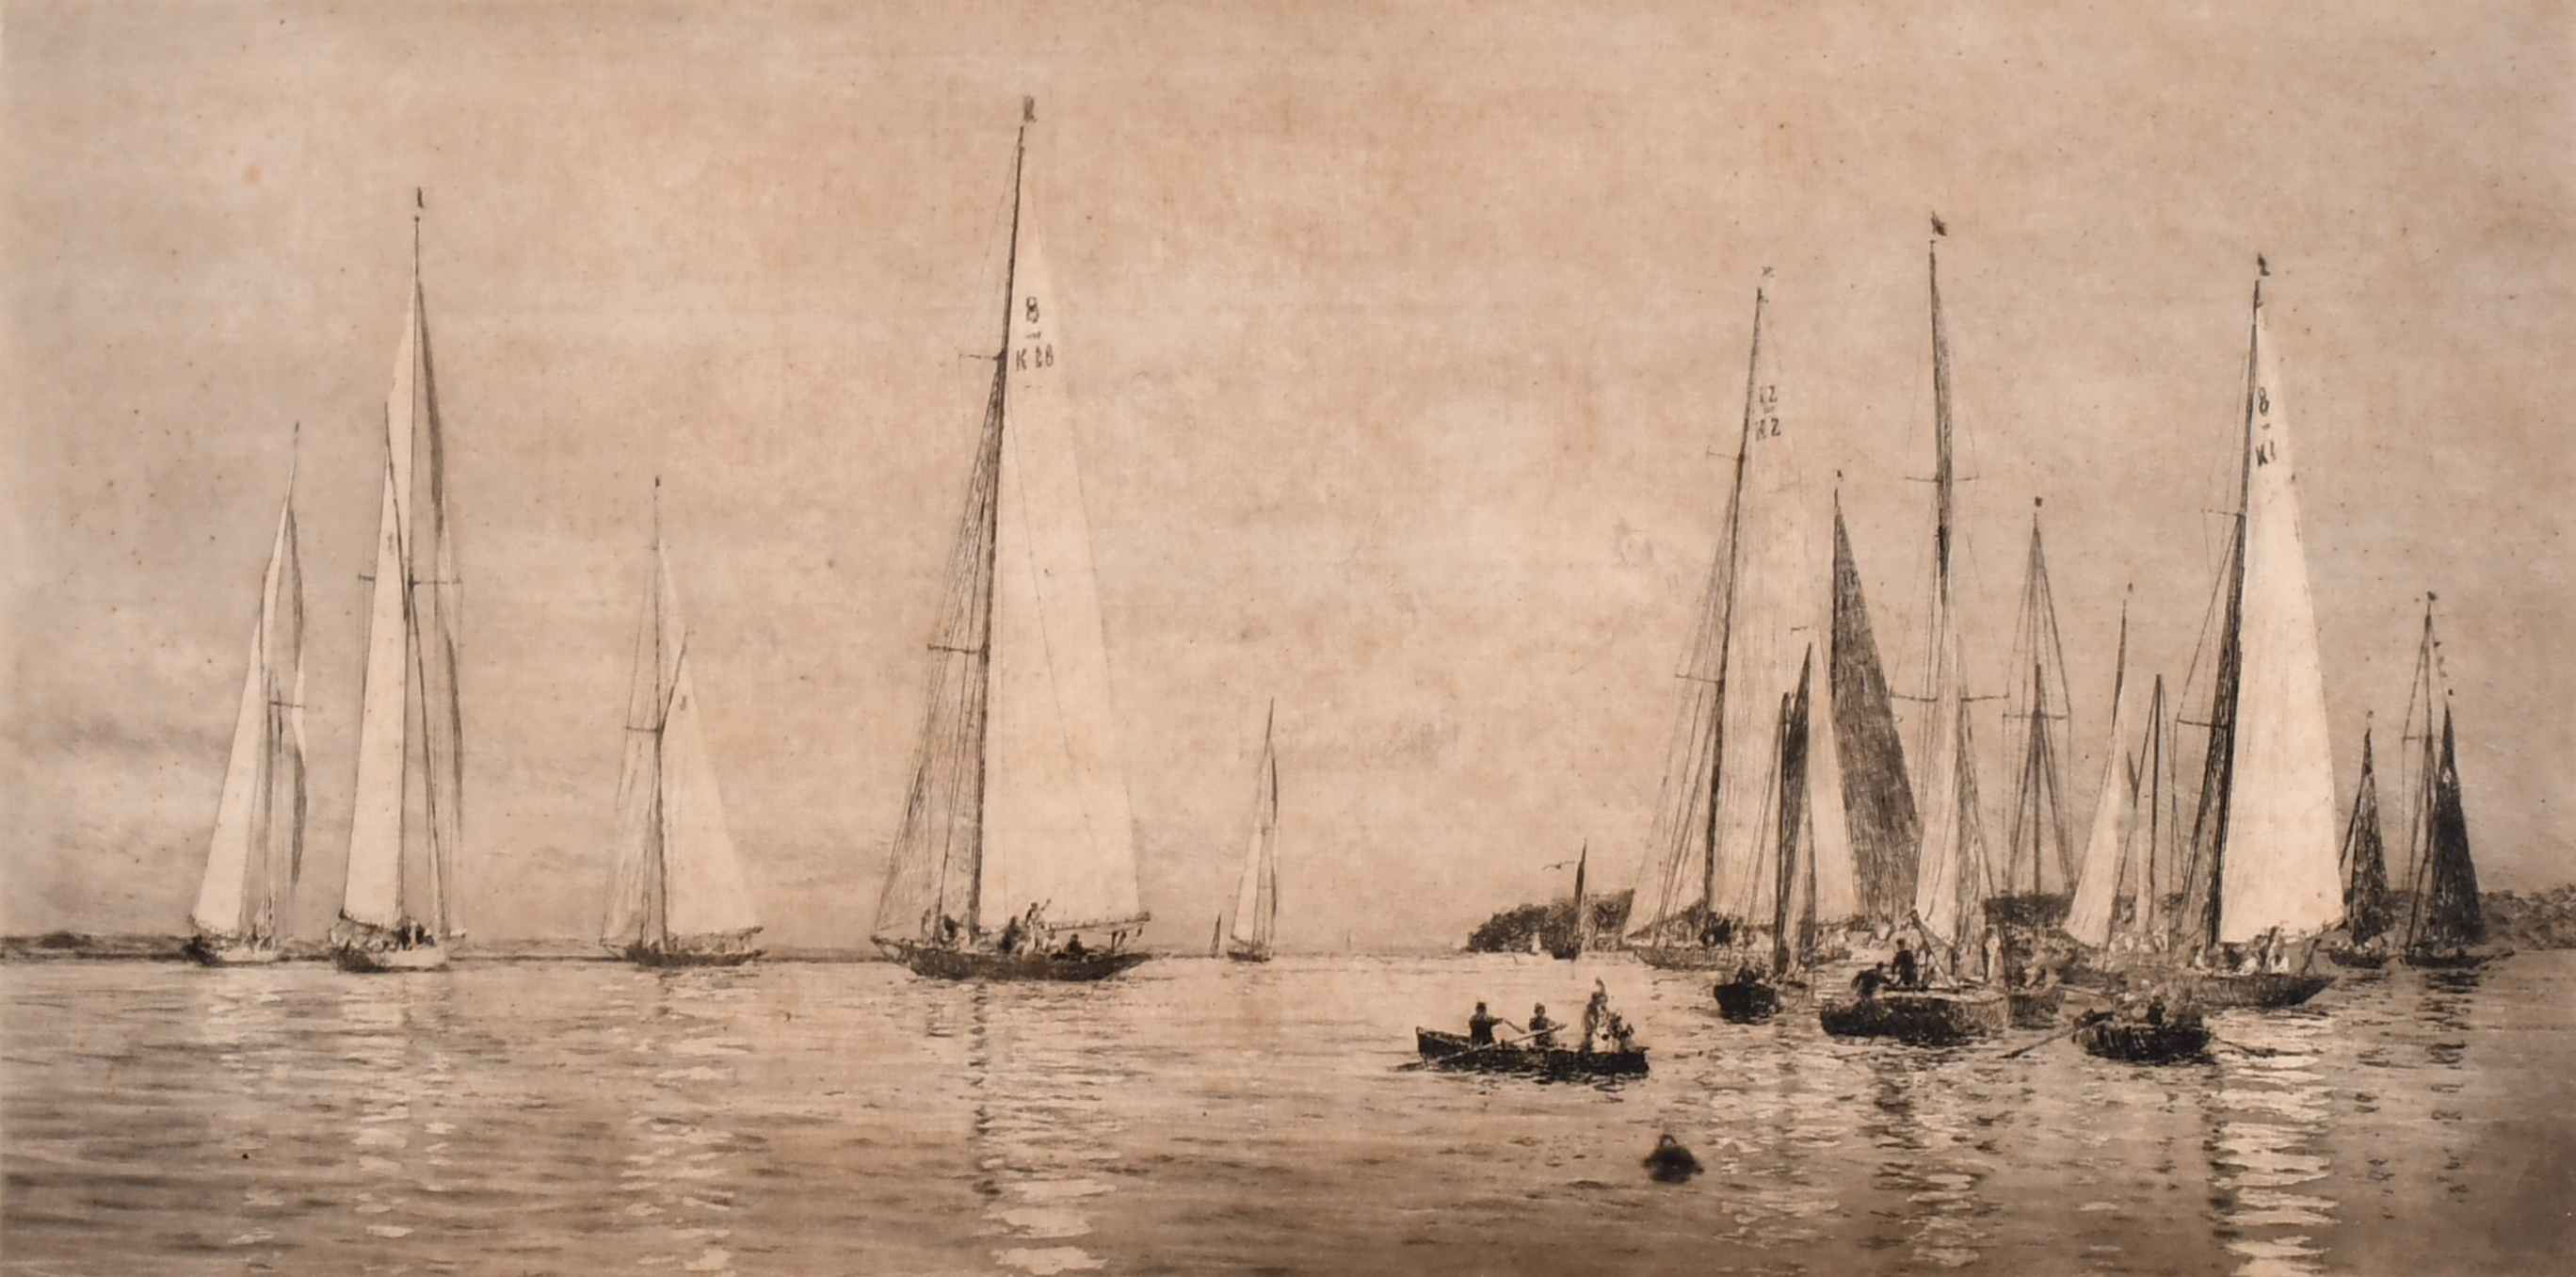 William Lionel Wyllie (1851-1931) British. “Yacht Racing off Cowes, (Isle of Wight)”, J Class